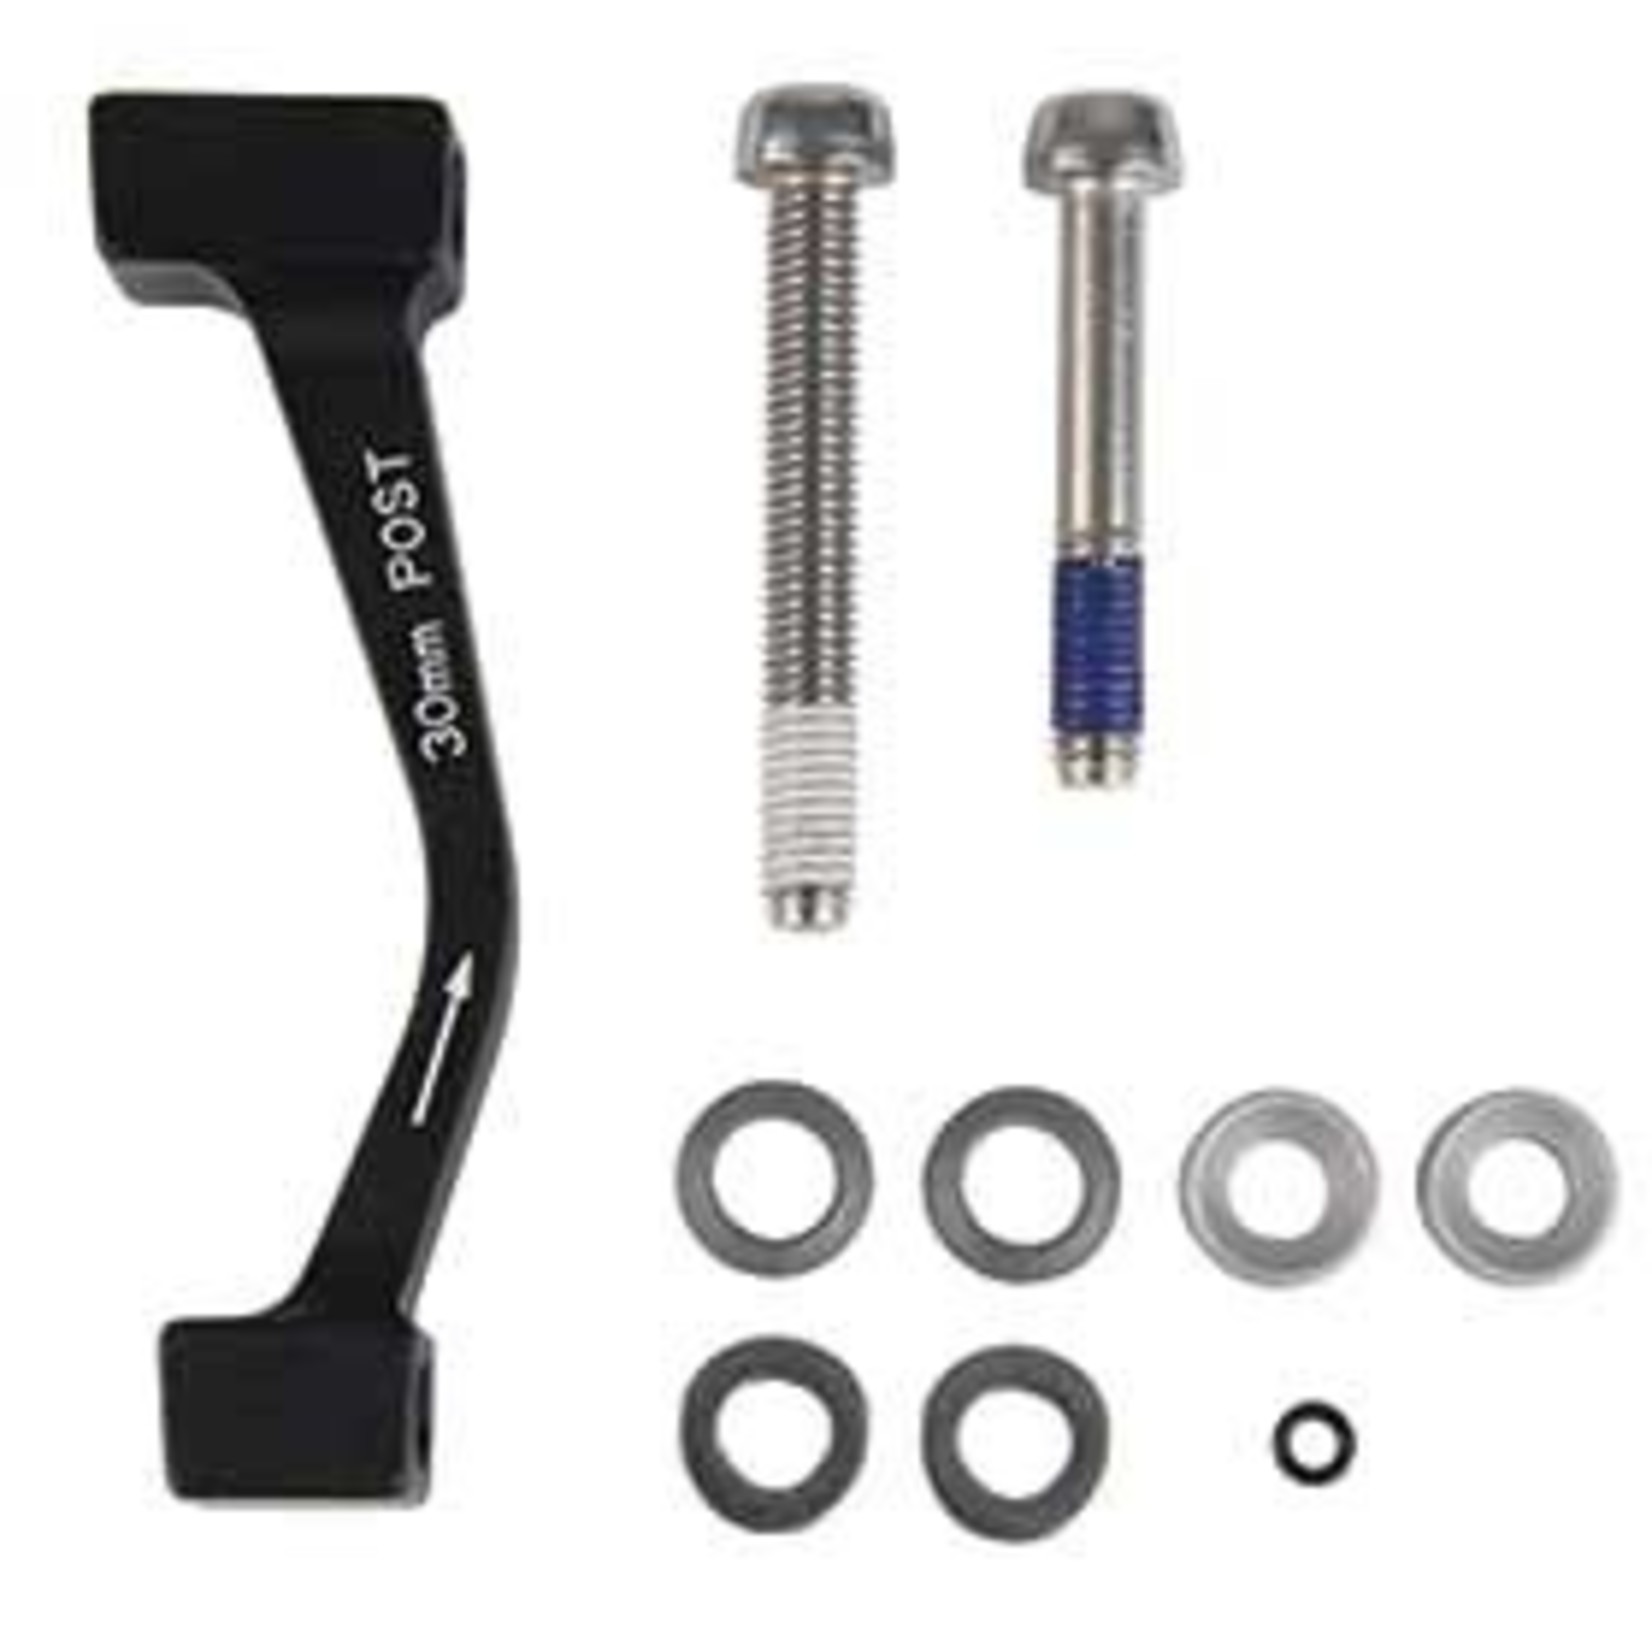 AVID Post Bracket - 30 P (Rear 170), Includes Stainless Caliper Mounting Bolts (CPS & Standard)